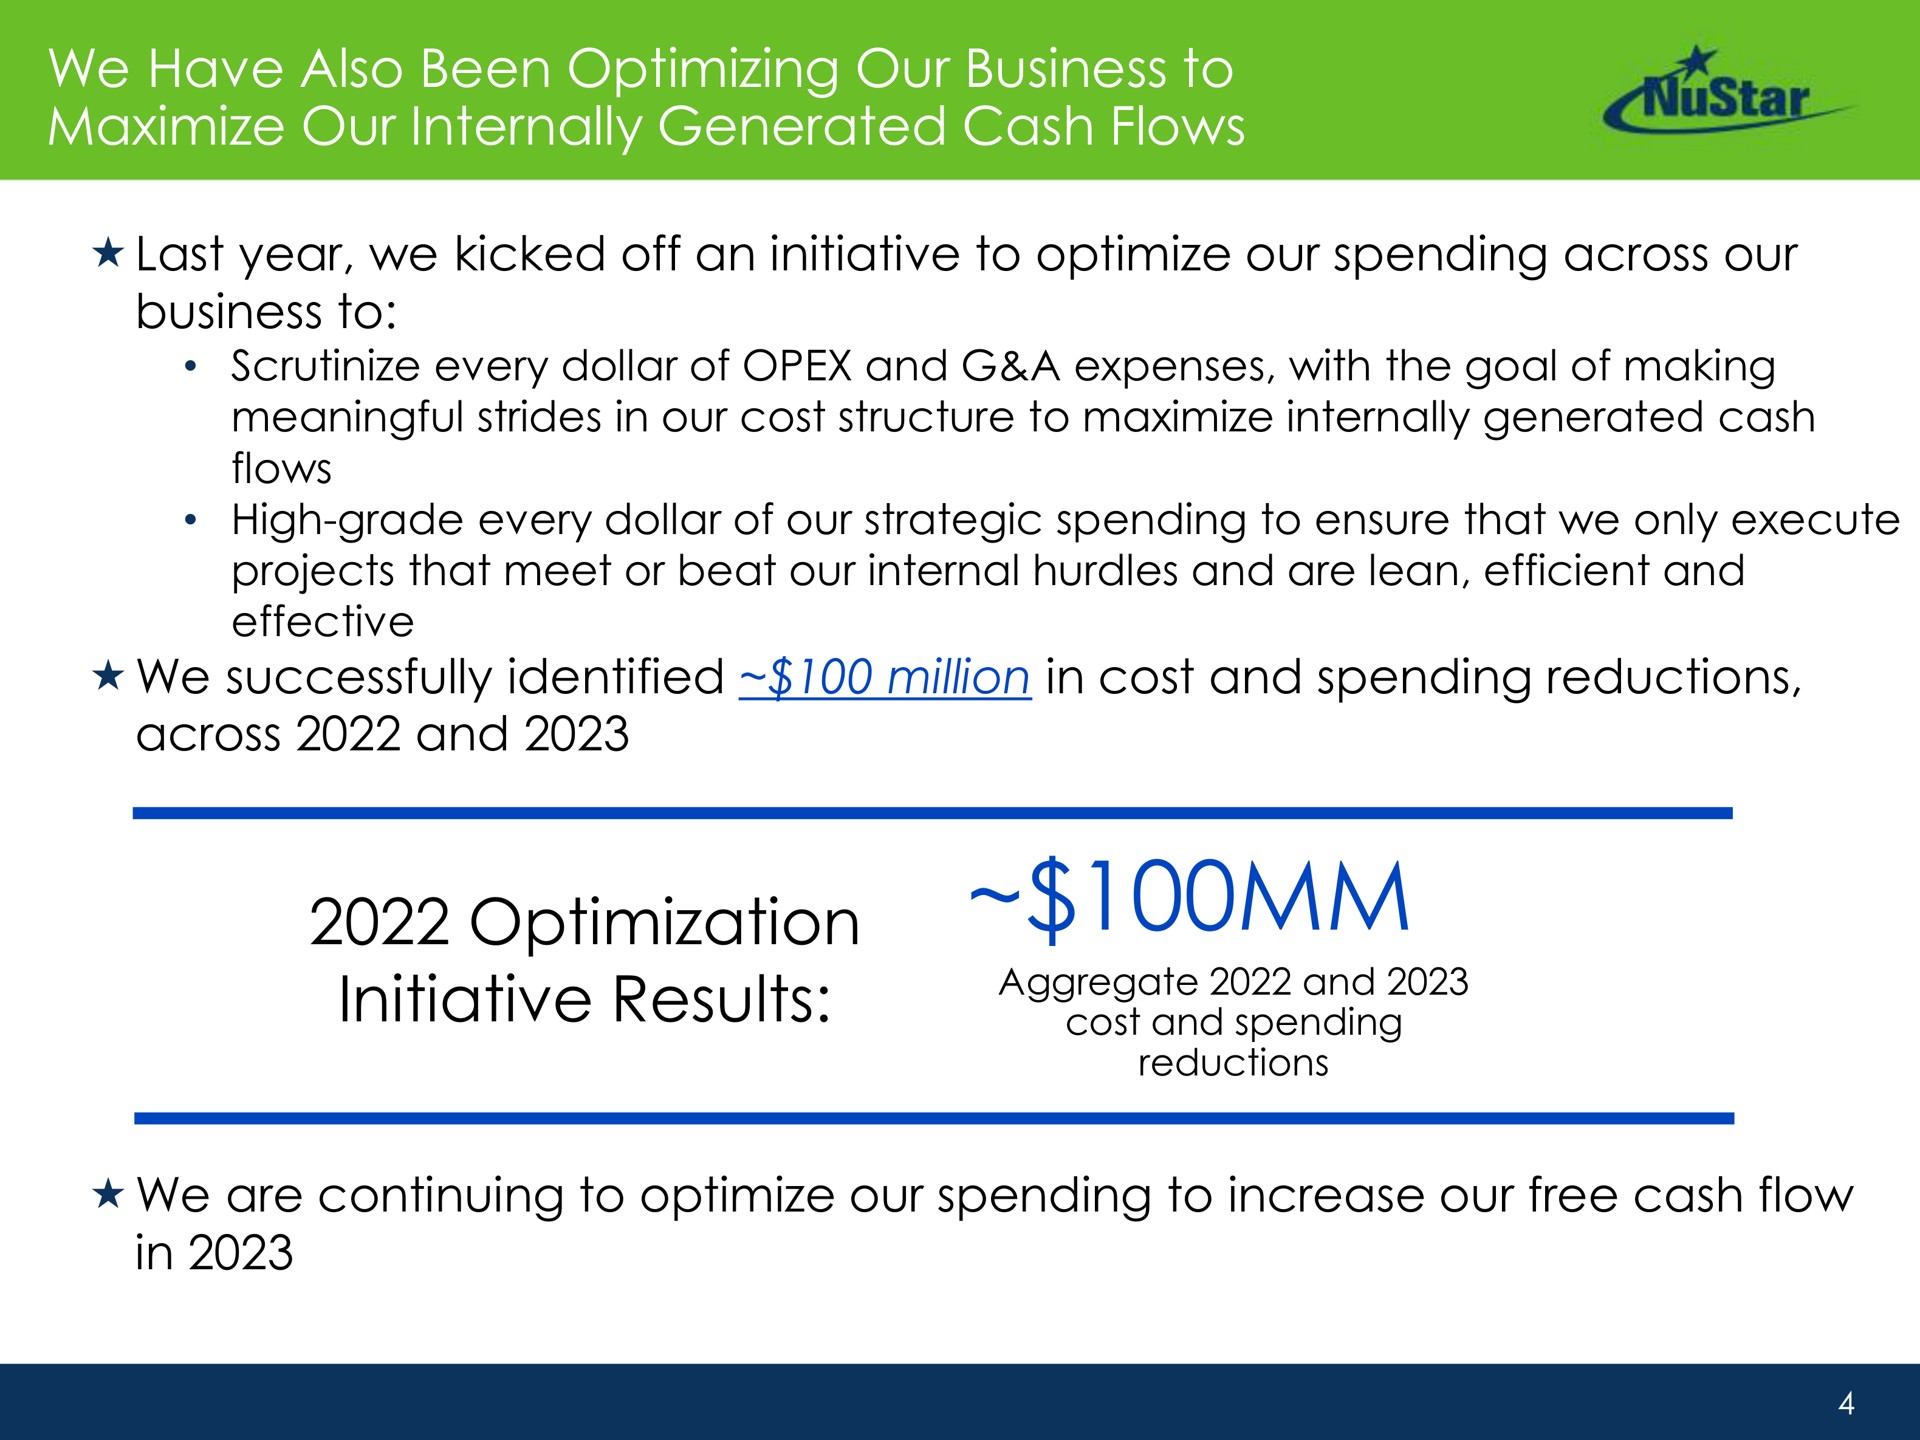 we have also been optimizing our business to maximize our internally generated cash flows last year we kicked off an initiative to optimize our spending across our business to we successfully identified million in cost and spending reductions across and optimization initiative results we are continuing to optimize our spending to increase our free cash flow in scrutinize every dollar of a expenses with the goal of making meaningful strides structure high grade every dollar of strategic ensure that only execute projects that meet or beat internal hurdles lean efficient effective | NuStar Energy